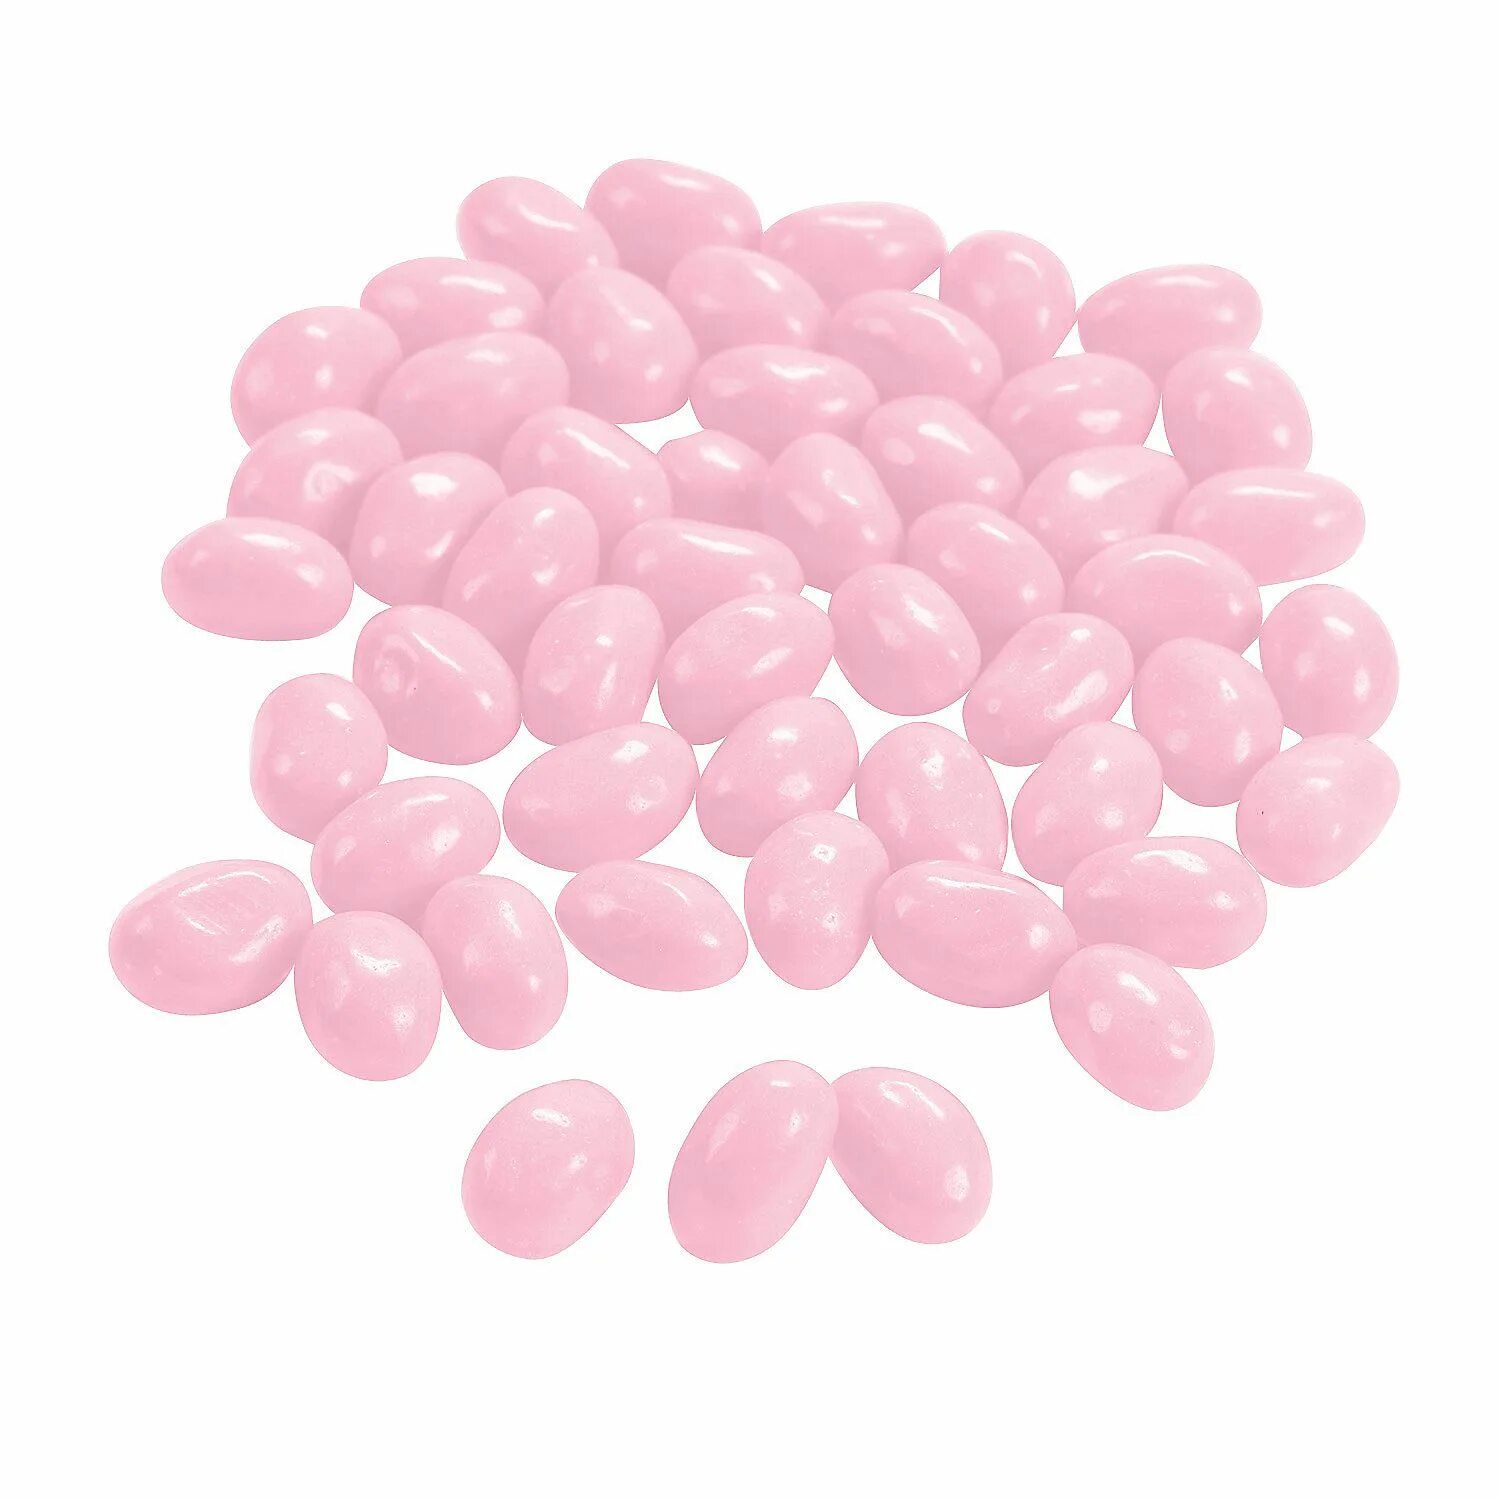 Jelly Pink. Розовый Боб. Jelly Beans Pink. Jelly Pink Switches. Pink jelly